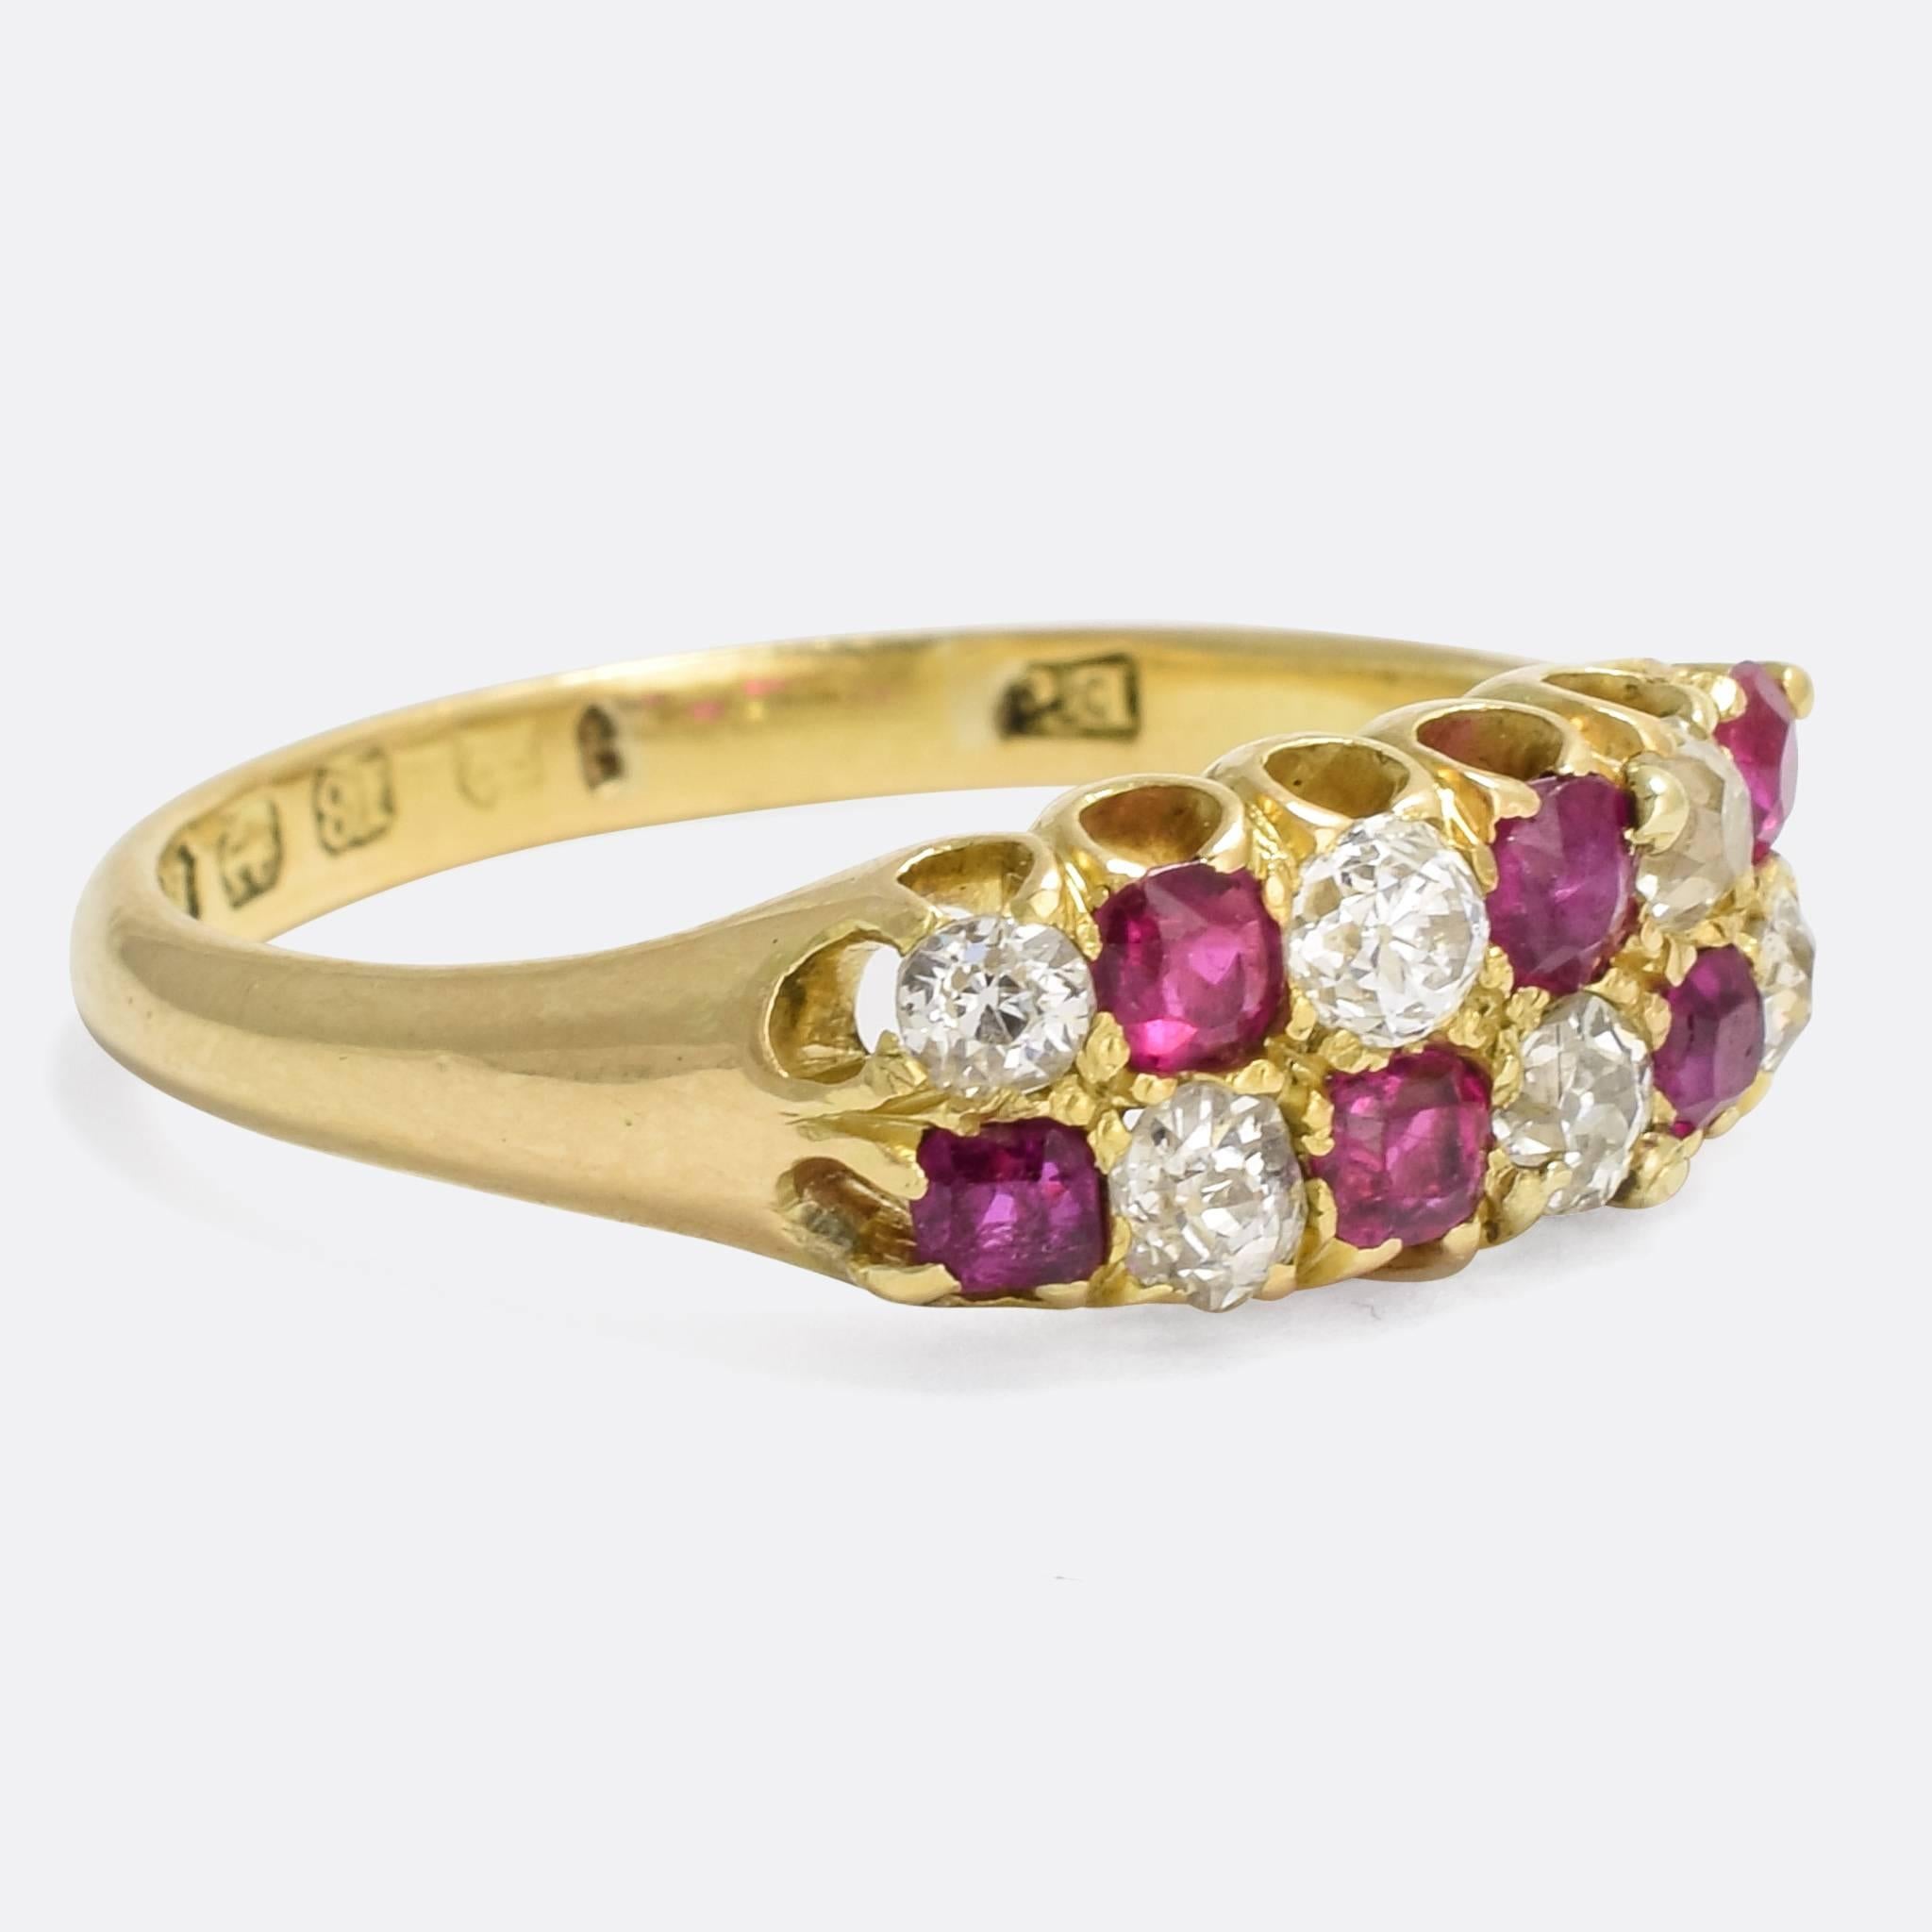 A cool antique chequerboard ring set with two rows of alternating rubies and old cut diamonds. The stones rest in simple scalloped claws, and are all clean and bright. The piece is modelled in 18 karat gold, with clear English hallmarks that date it